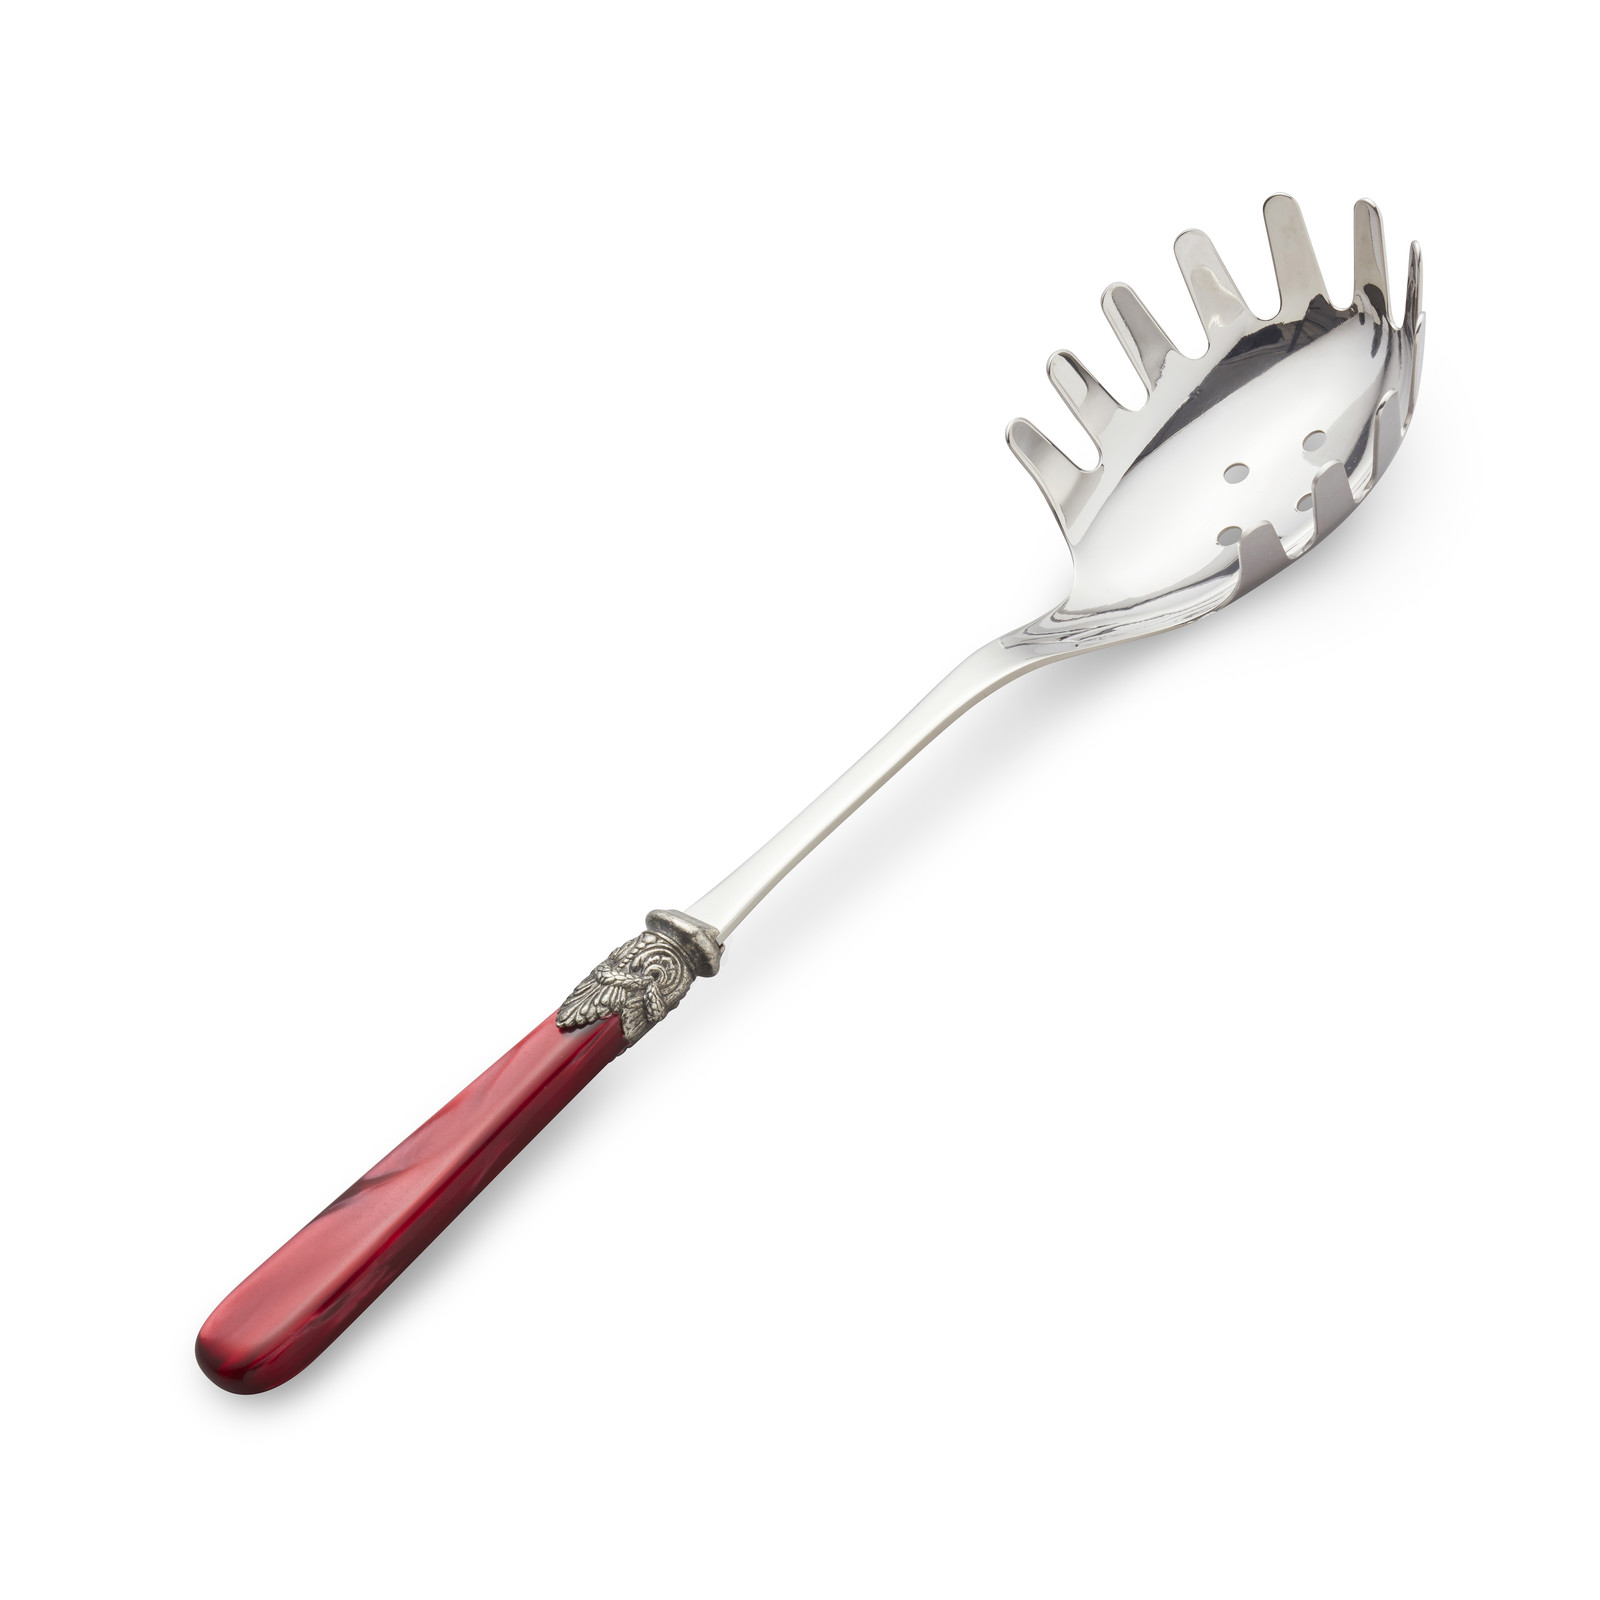 https://cdn.webshopapp.com/shops/295052/files/317525561/1600x1600x2/spaghetti-spoon-noodle-spoon-red-with-mother-of-pe.jpg